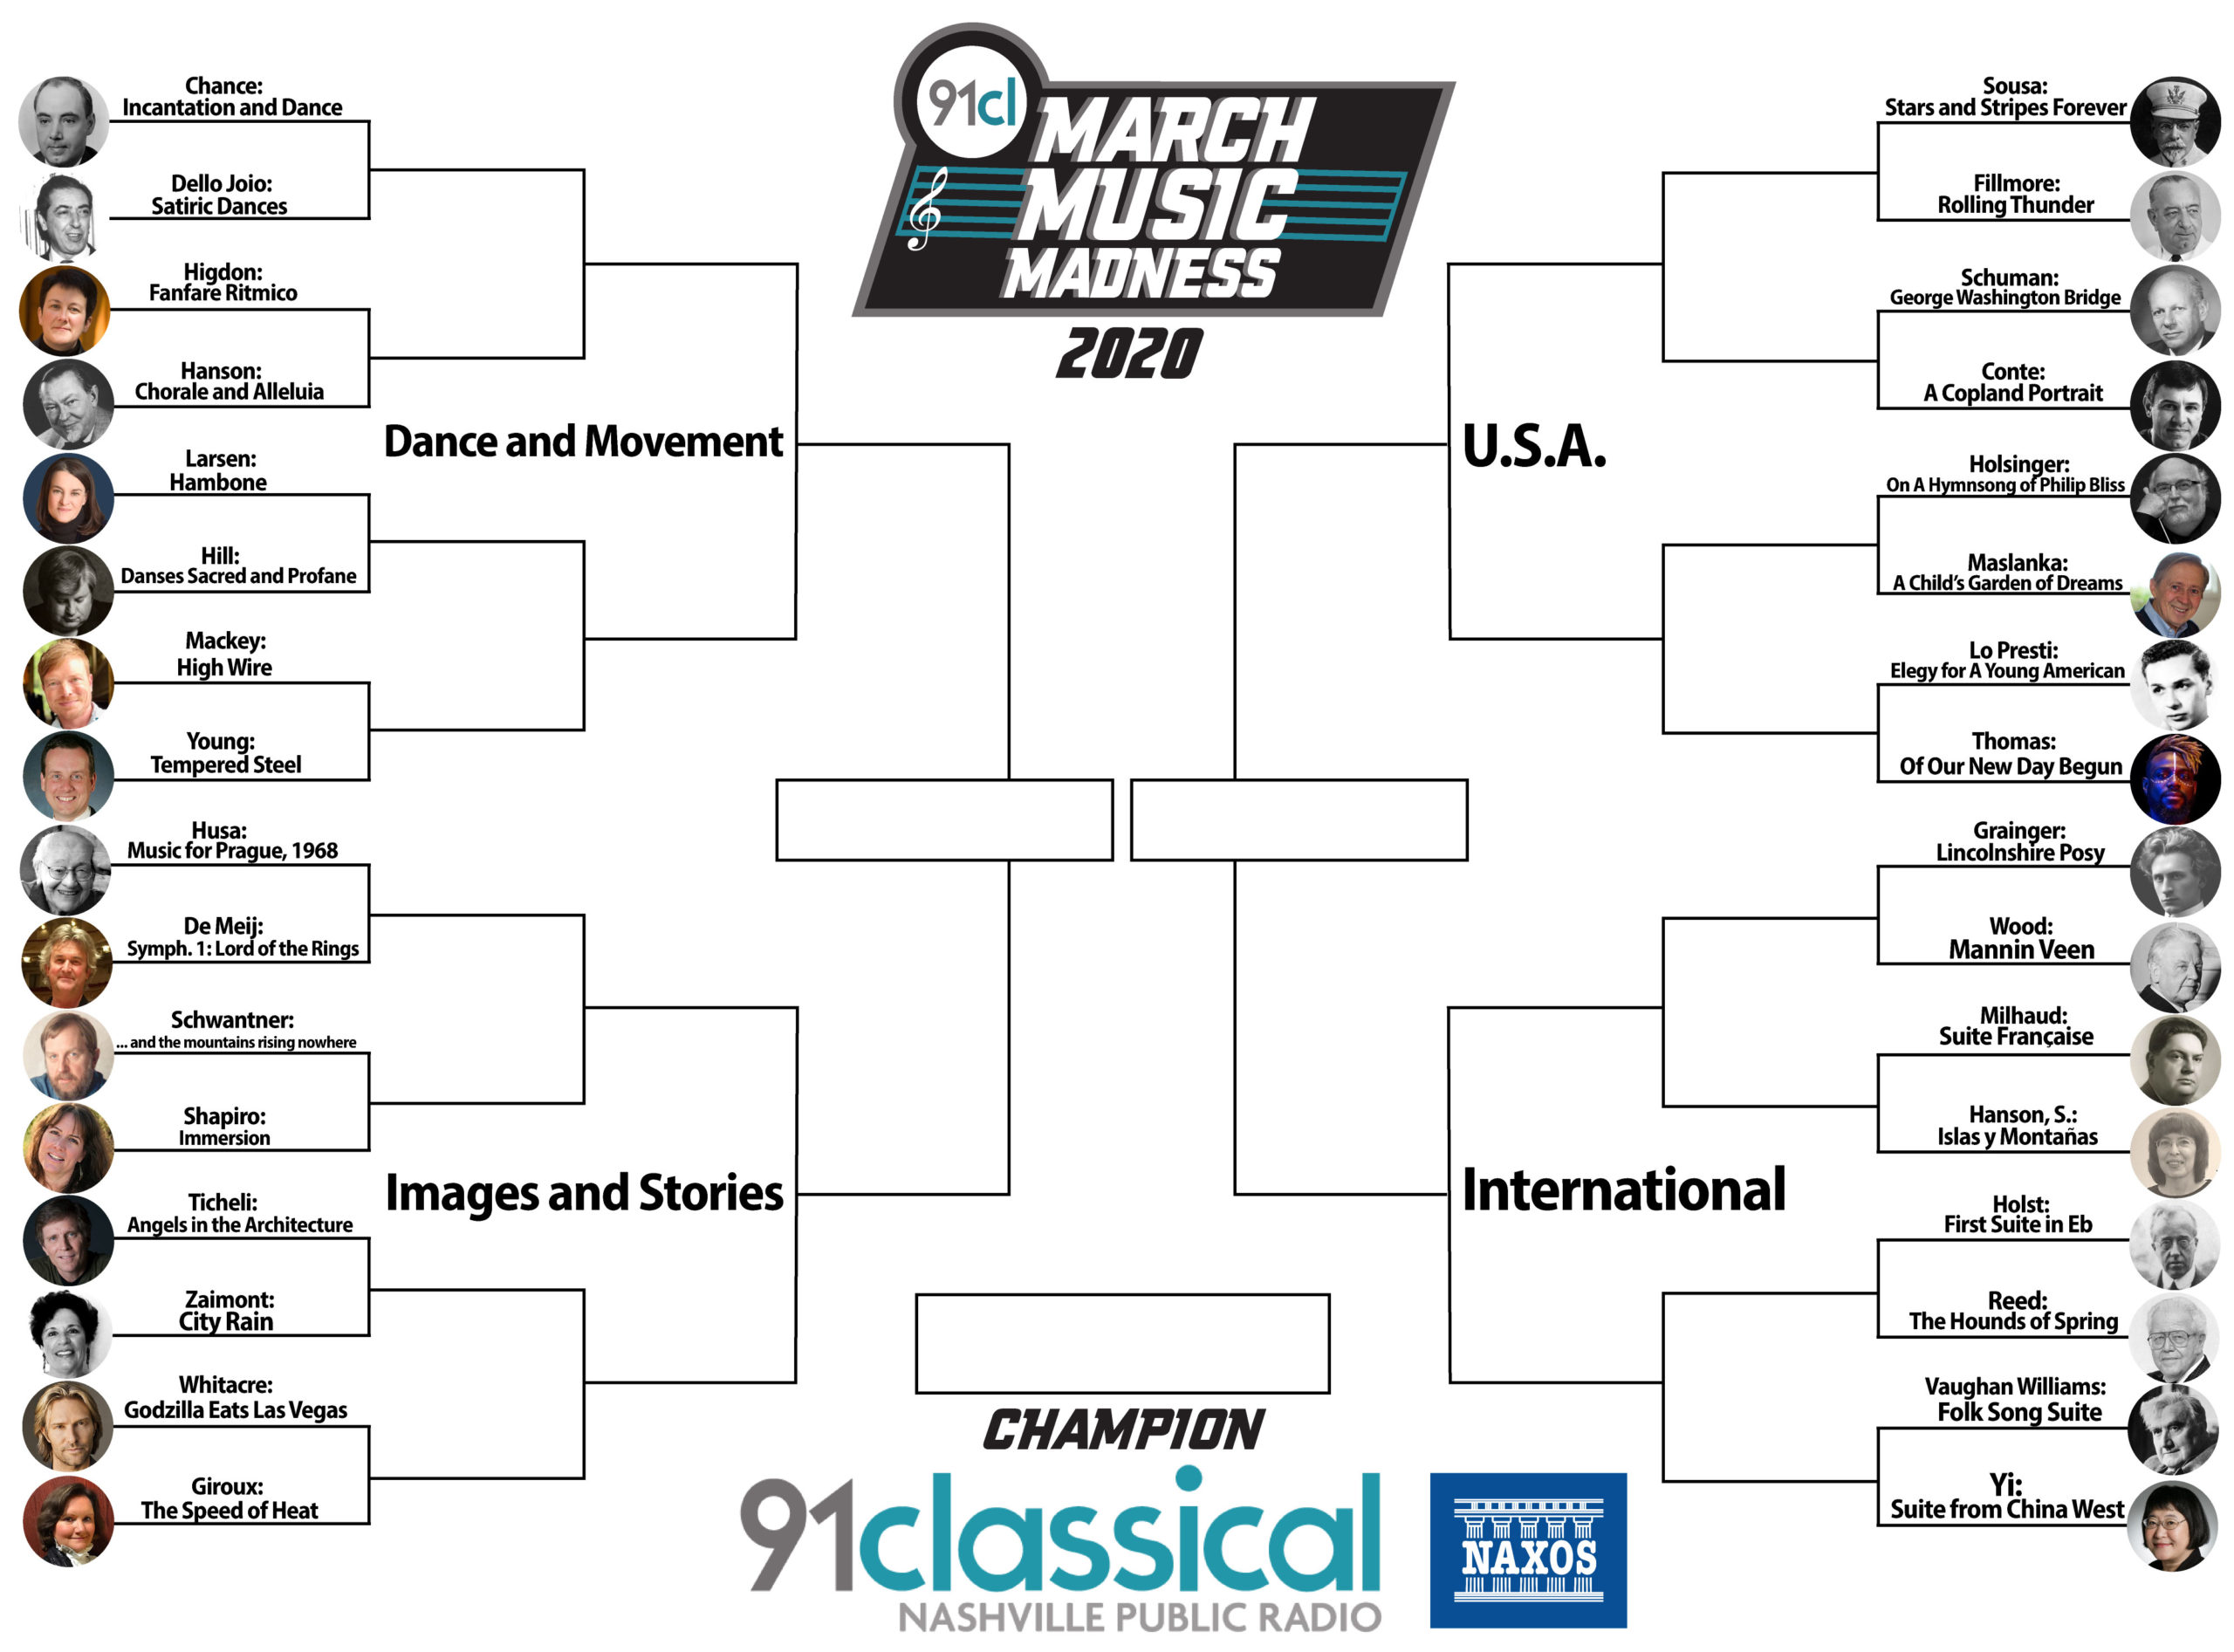 make-your-picks-in-our-second-annual-march-music-madness-nashville